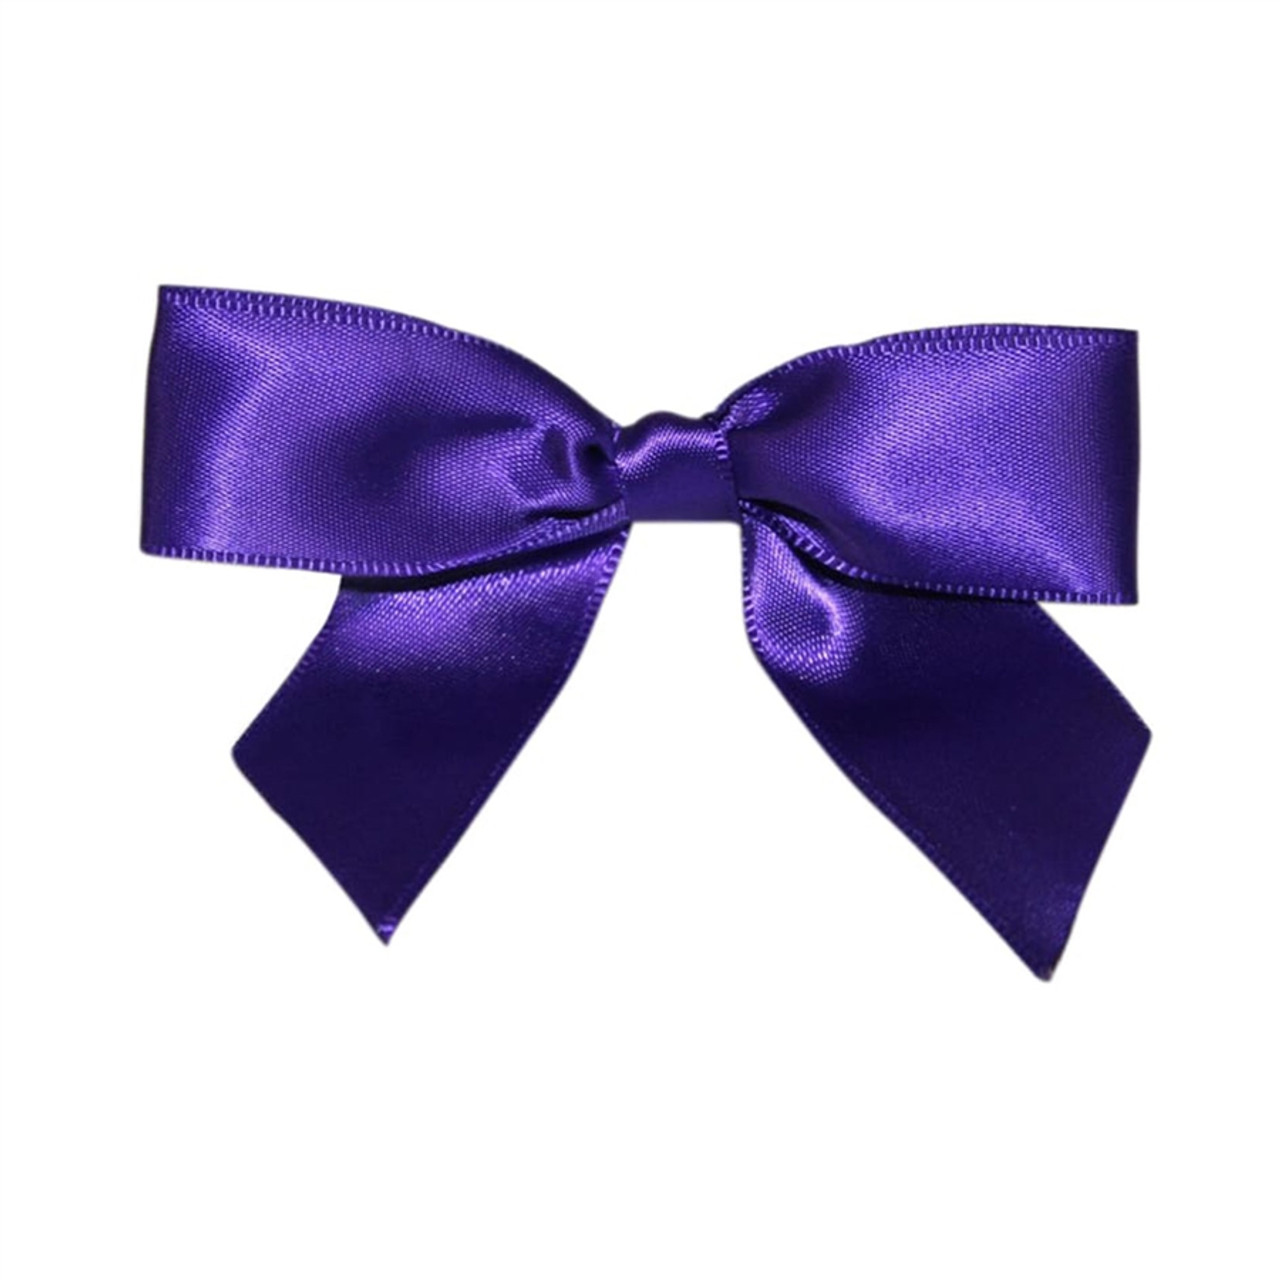 DEEP PURPLE Satin Pre-tied Bow, 3.25” Bow, 5” Twist Tie, 7/8 Ribbon - Pack  of 50 Bows - Miss Cookie Packaging